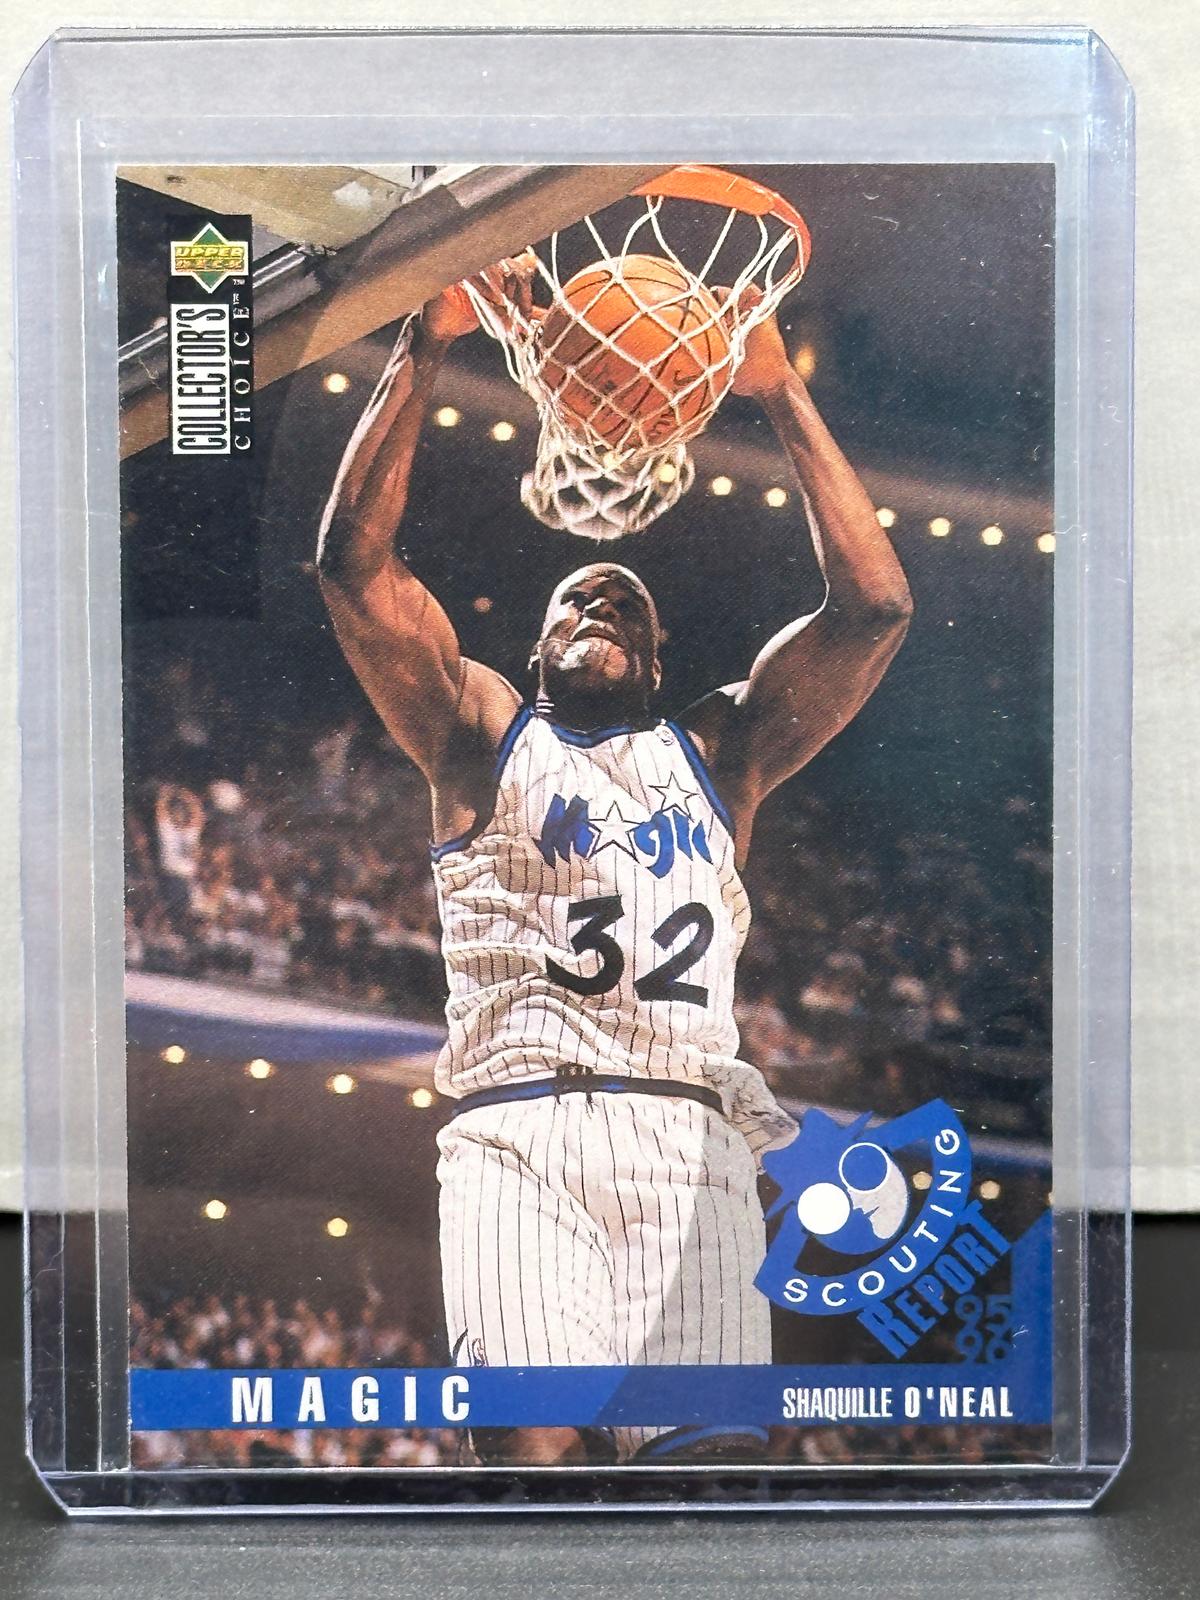 Shaquille O'Neal 1996 Upper Deck Collector's Choice Scouting Report #129